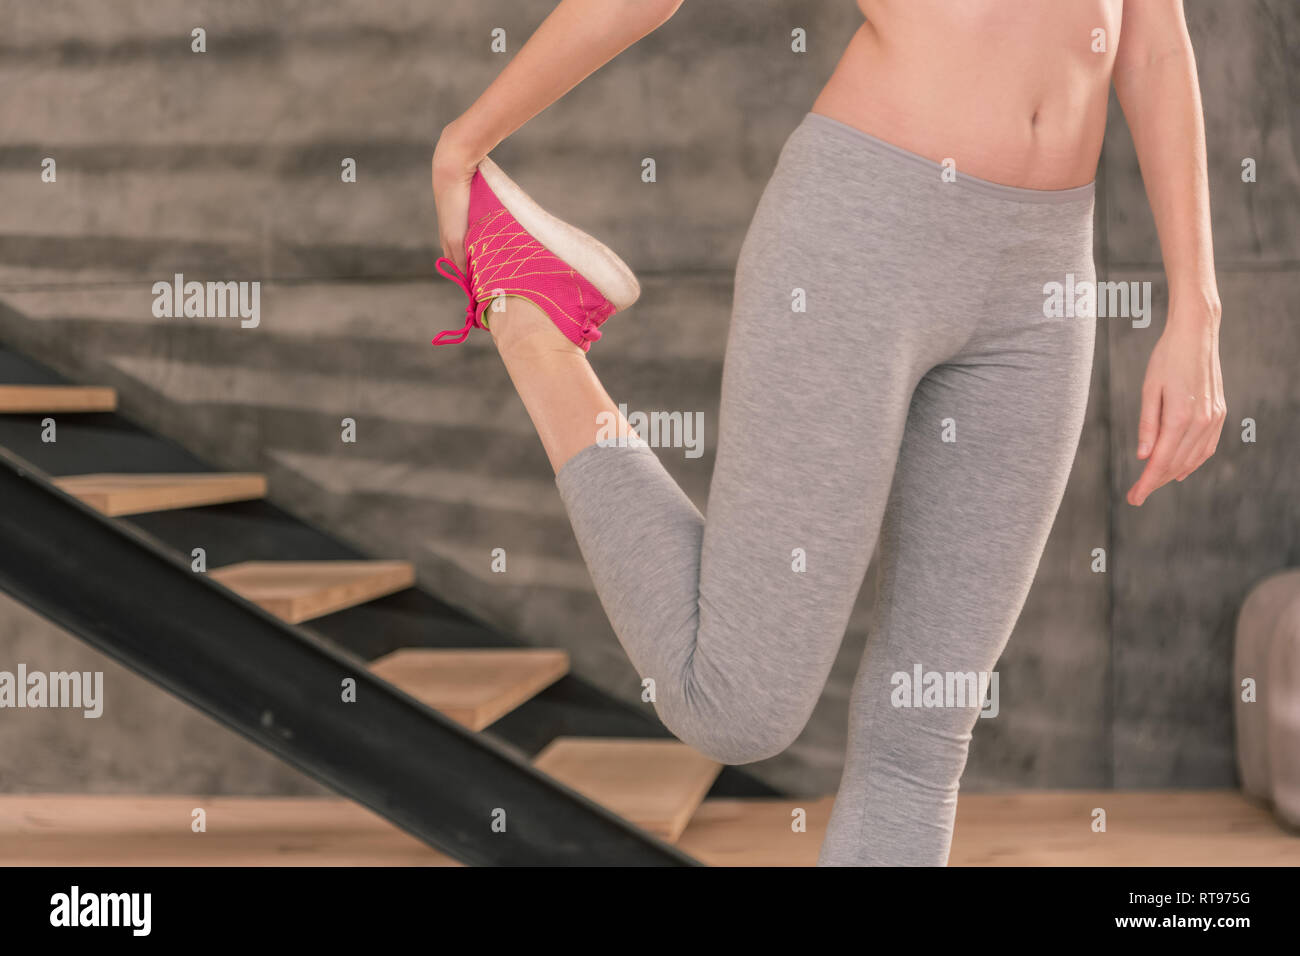 Slim woman wearing grey leggings stretching her legs after fitness Stock Photo